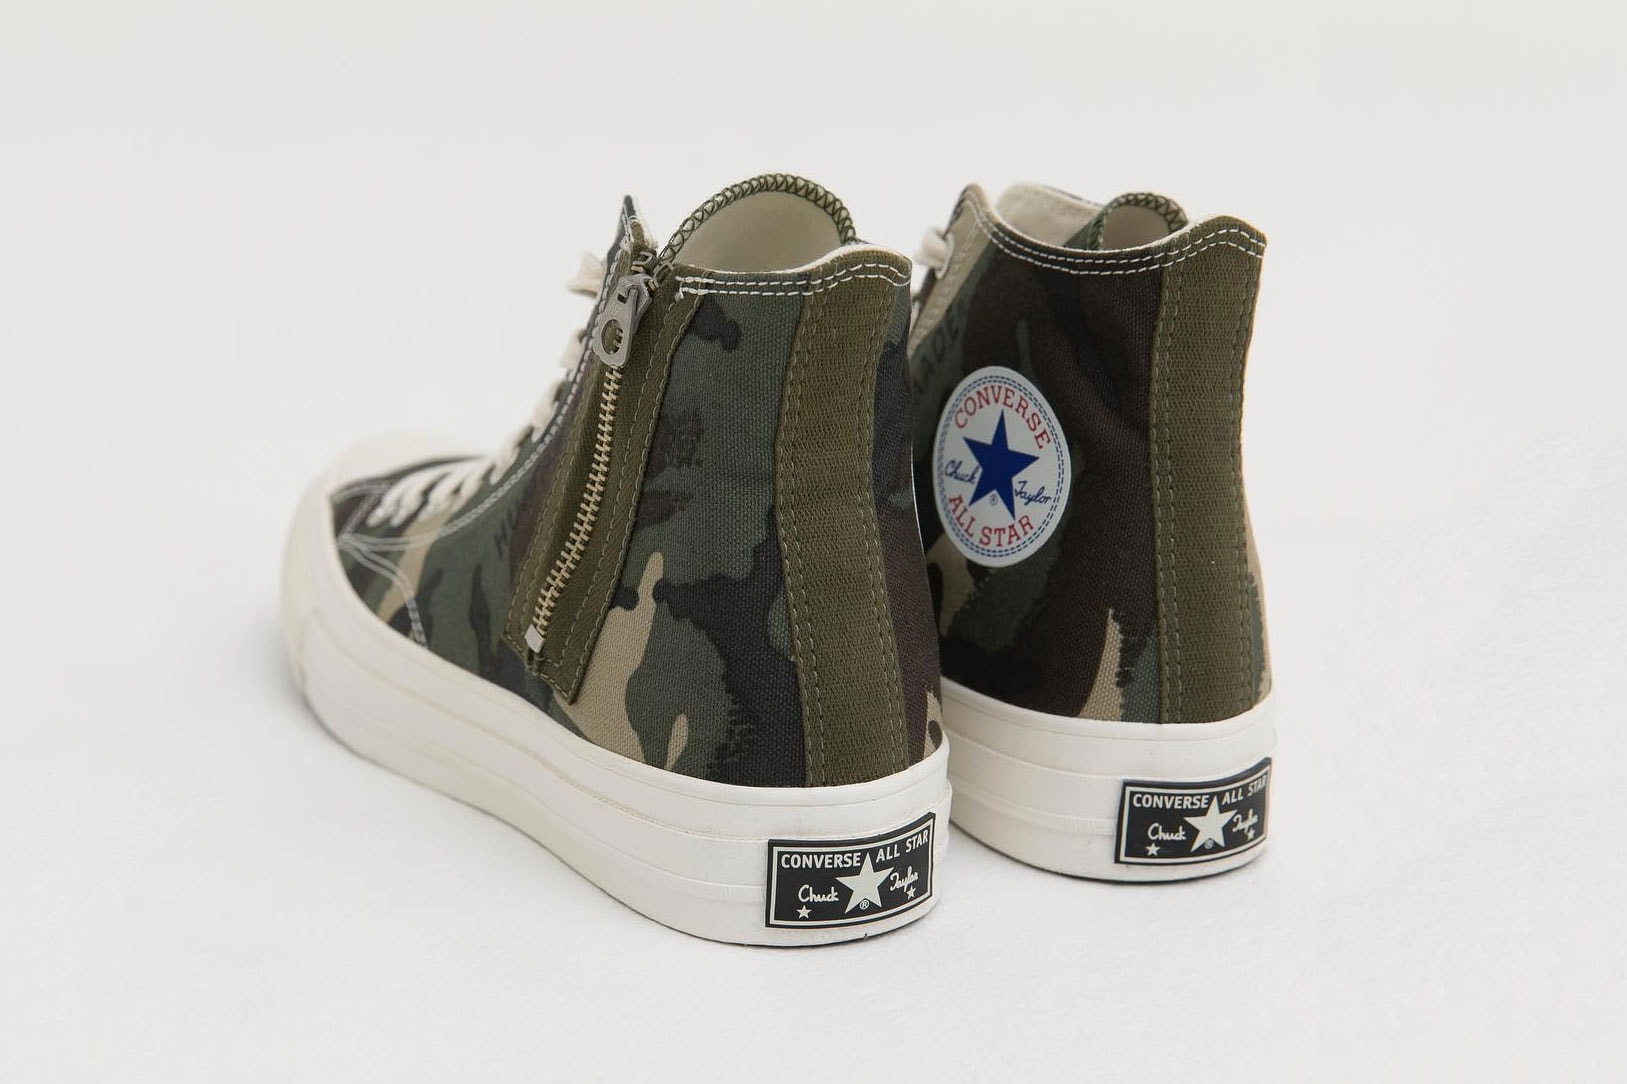 HUMAN MADE Converse Chuck Taylor Hi Release kicks sneakers basketball vintage casual shoes trainers camo military 